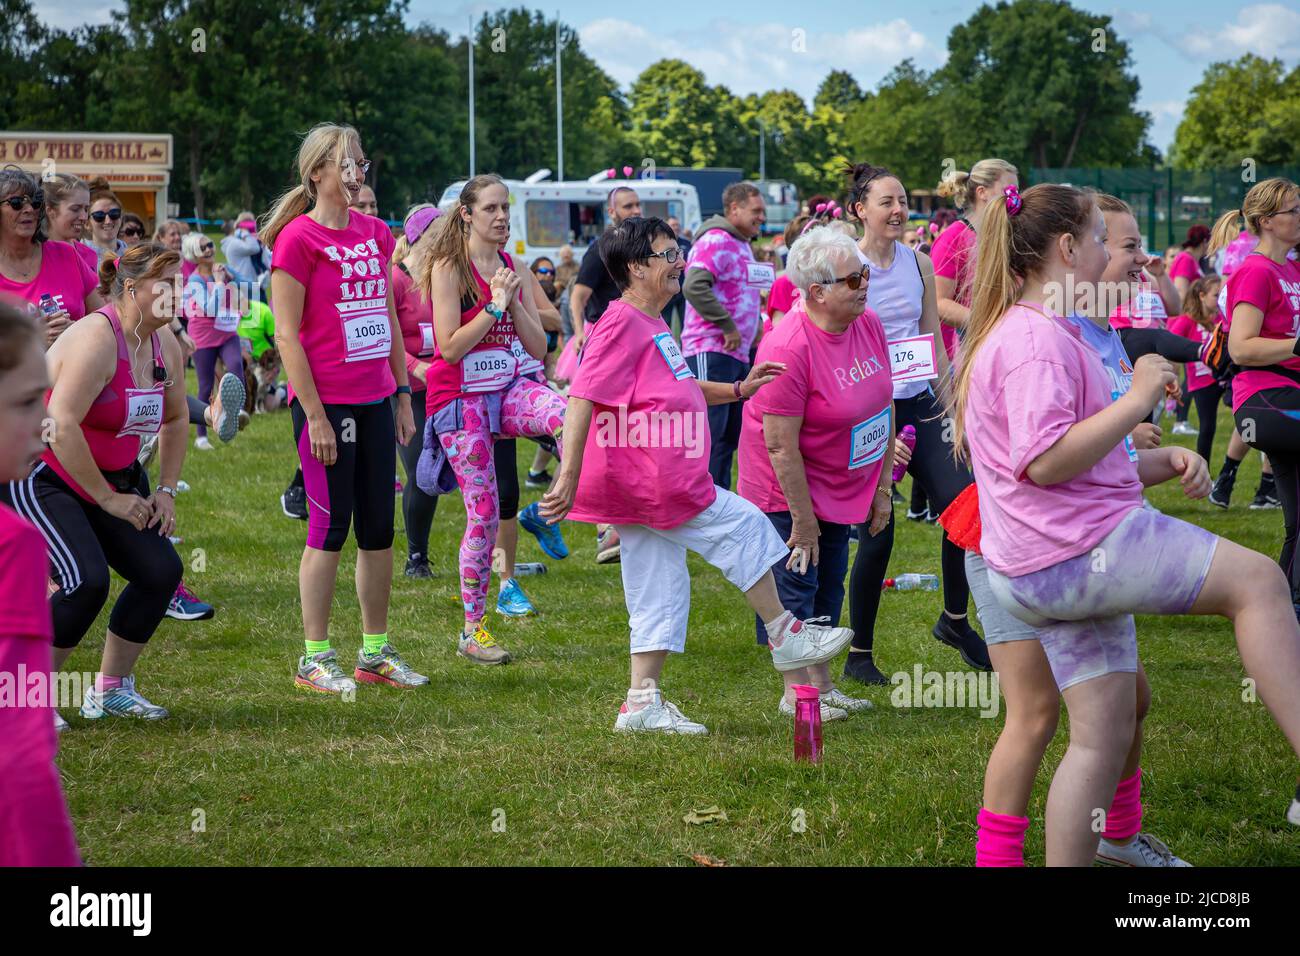 12 June 2022; Warrington Cheshire, UK; Race for Life in Victoria Park in aid of Cancer Research. The runners walm up before the race Credit: John Hopkins/Alamy Live News Stock Photo